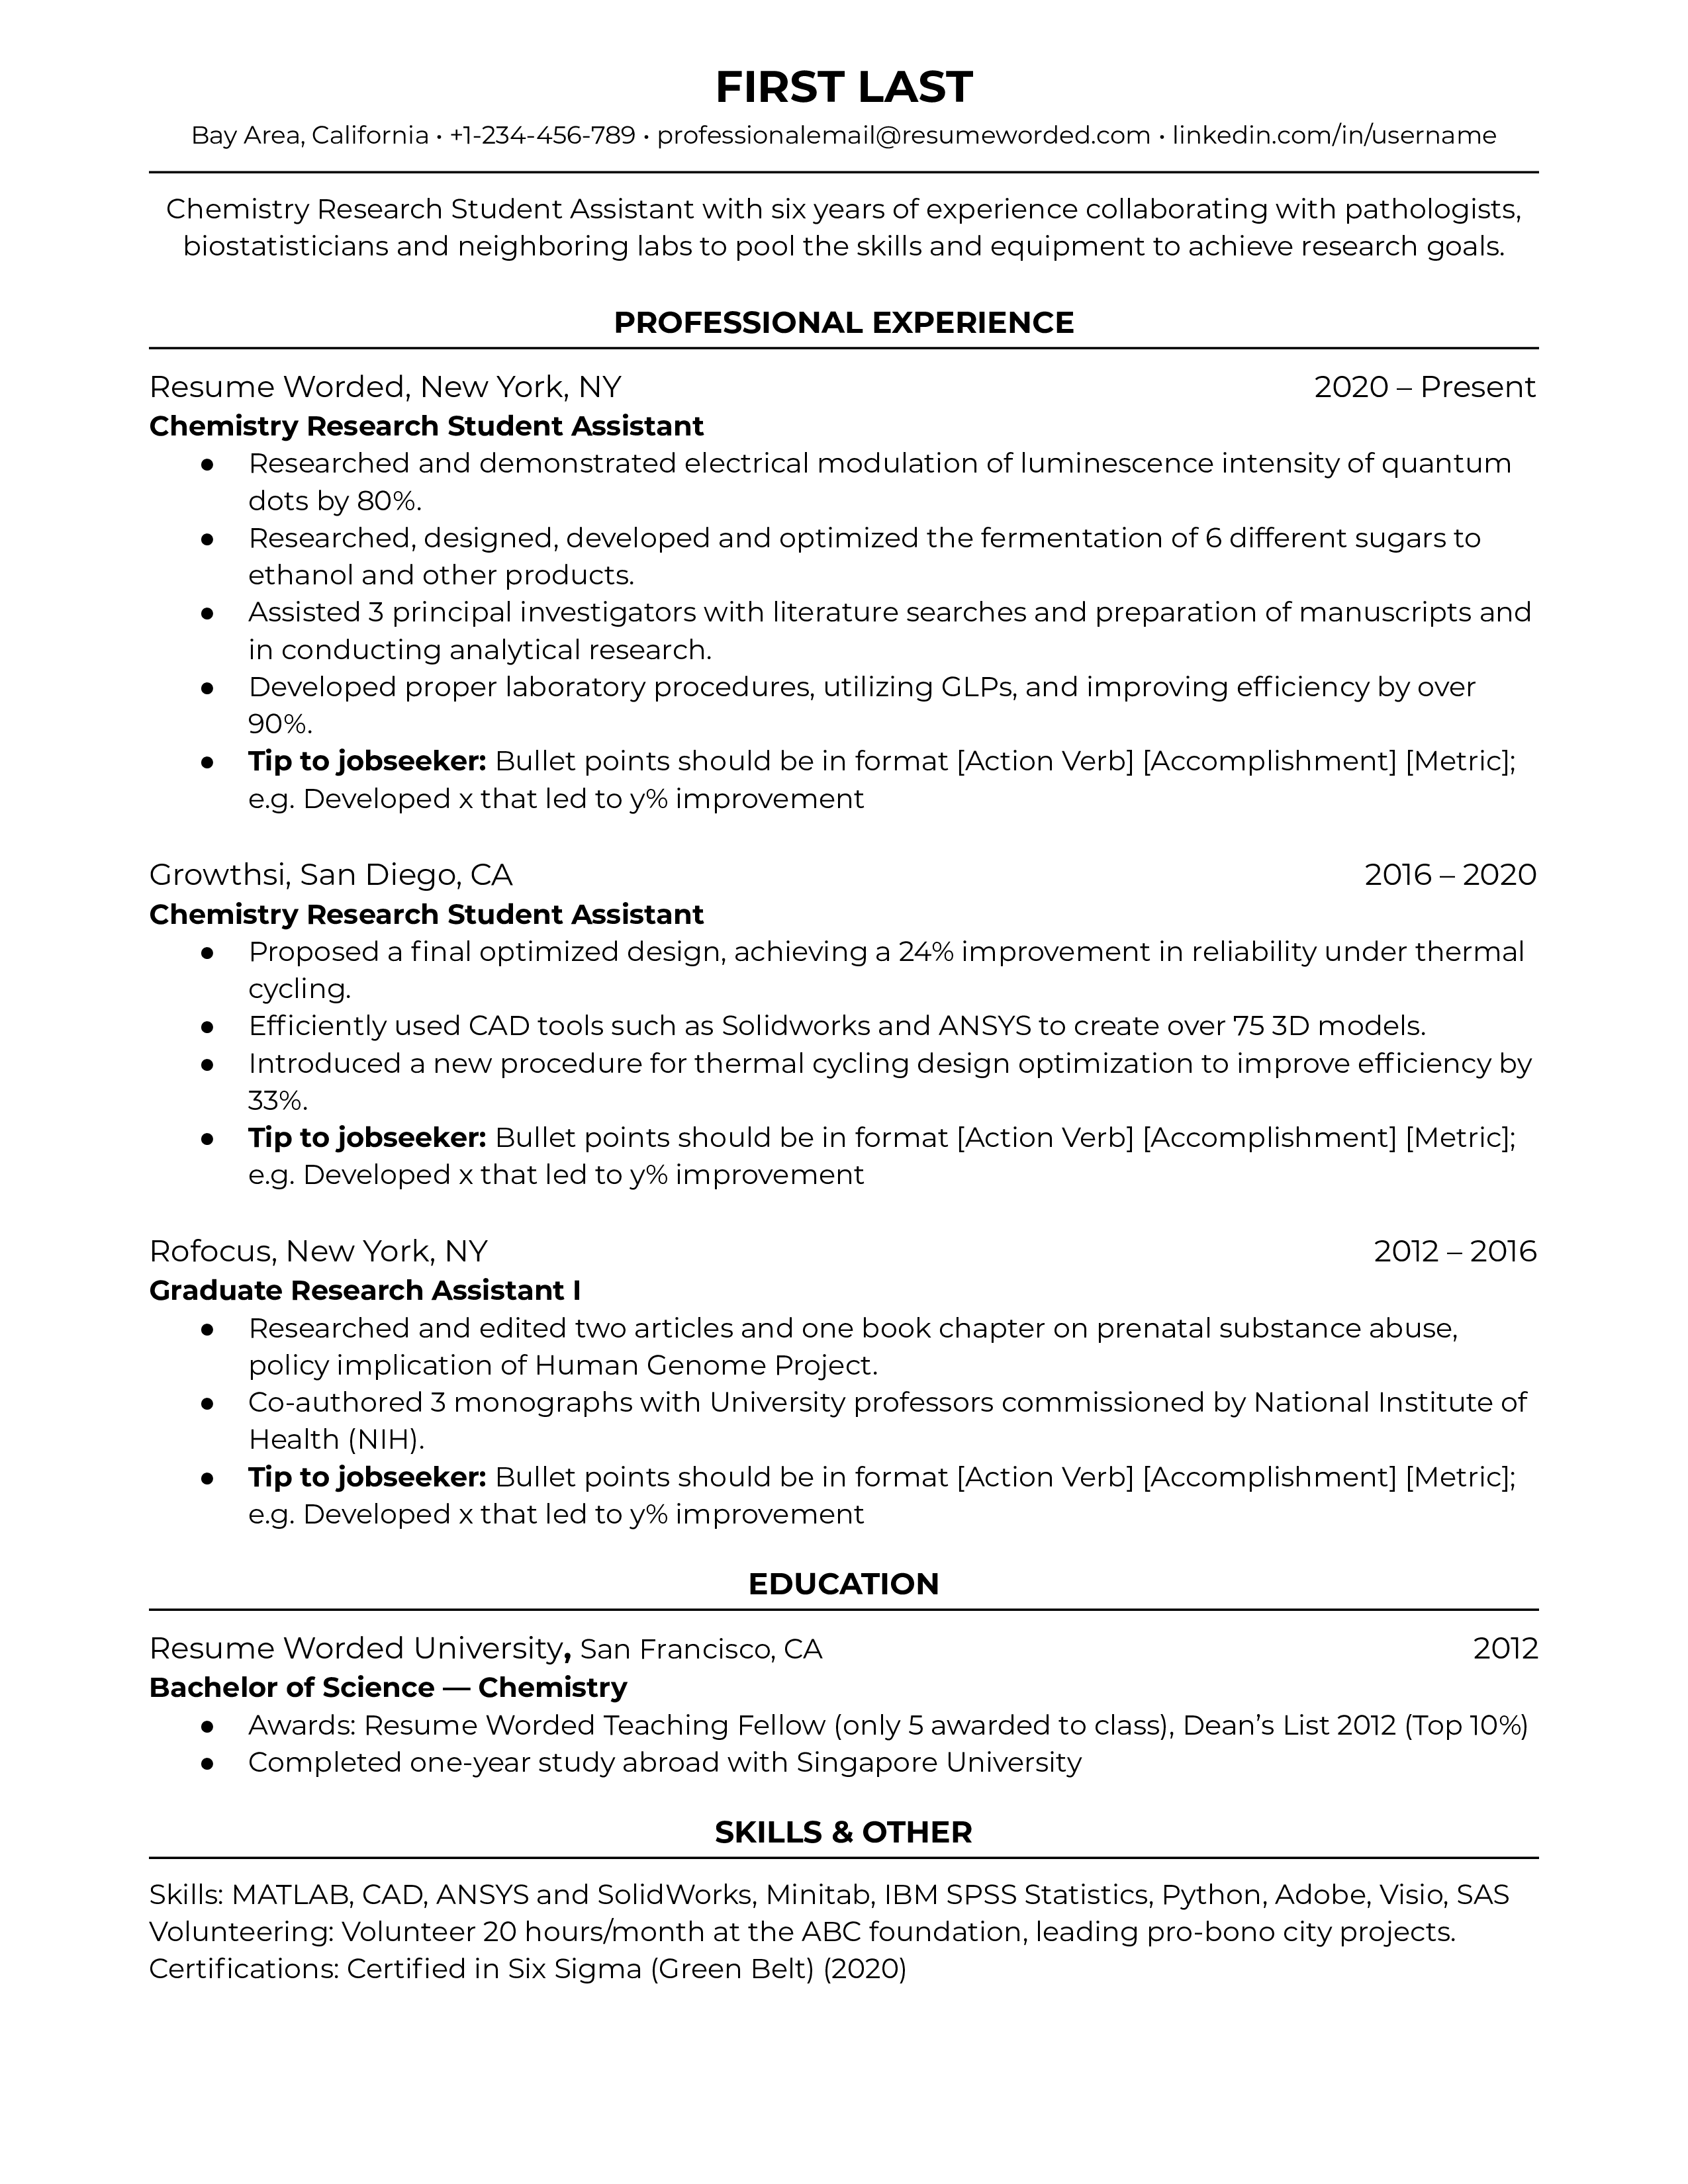 A resume for a chemistry research student with a bachelor's degree in chemistry and experience as a graudate research assistant.